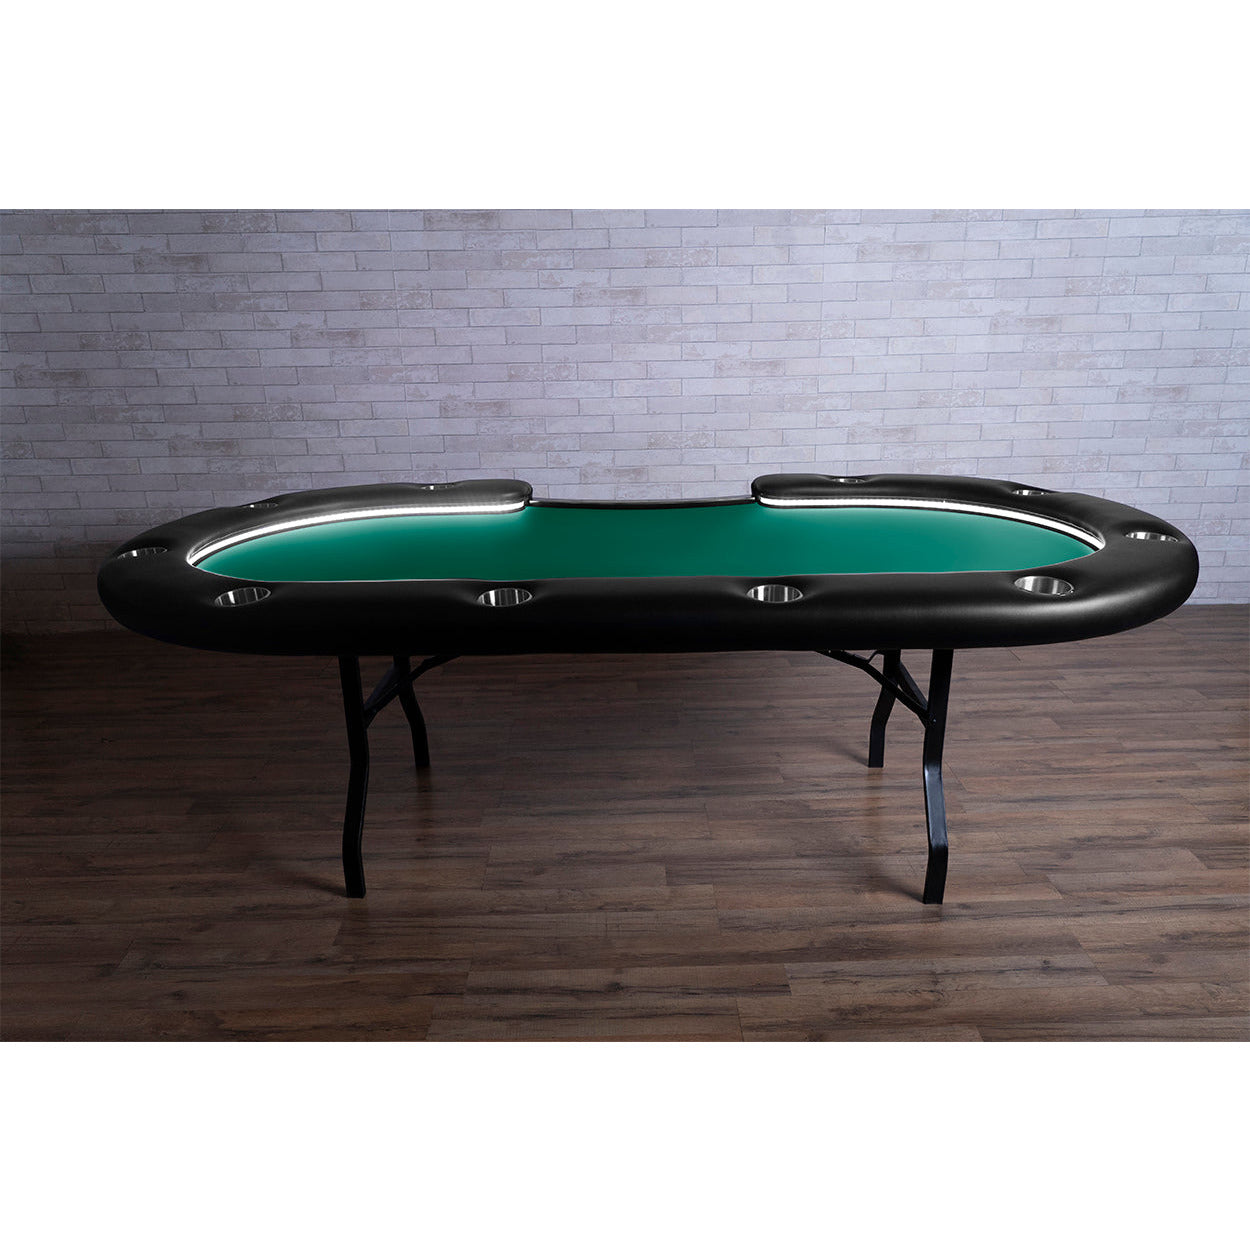 BBO The Aces Pro Alpha Folding Poker Table green side view 